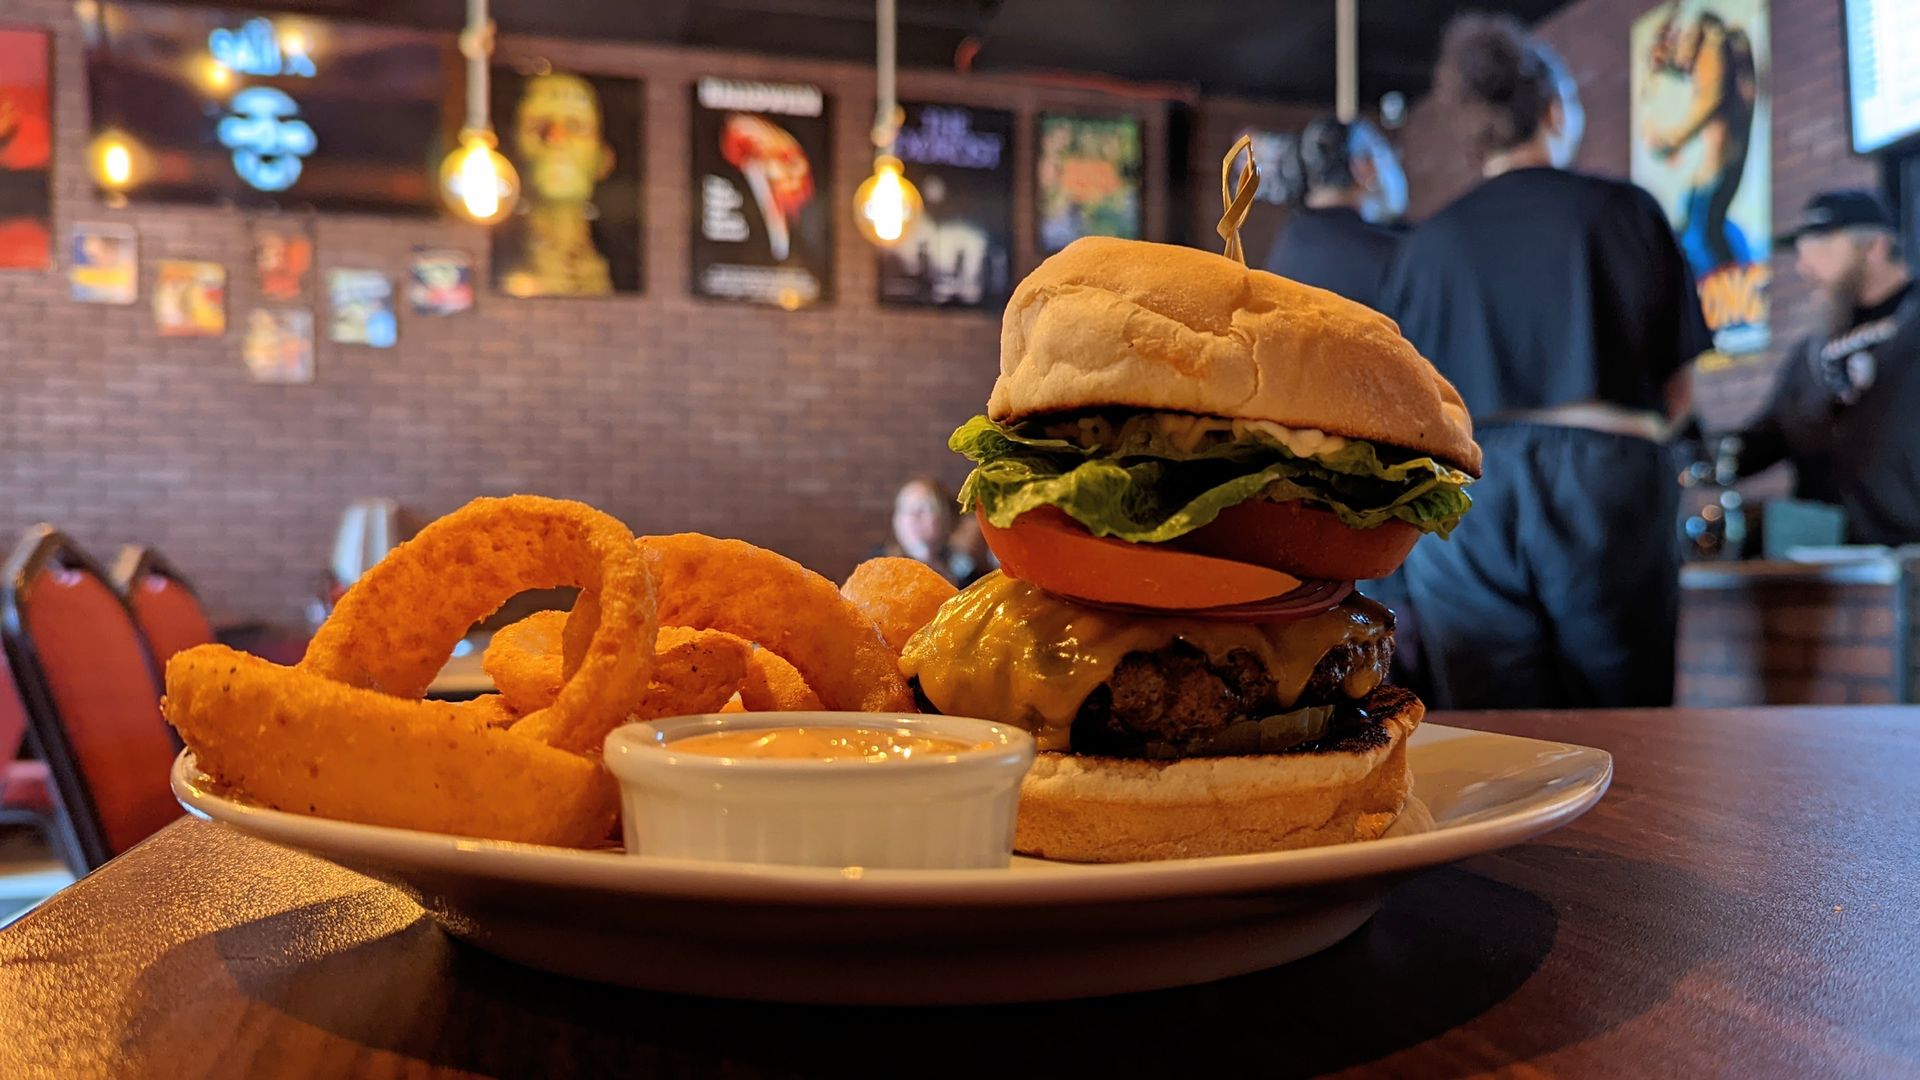 A towering cheeseburger with onion rings and condiments in a jar